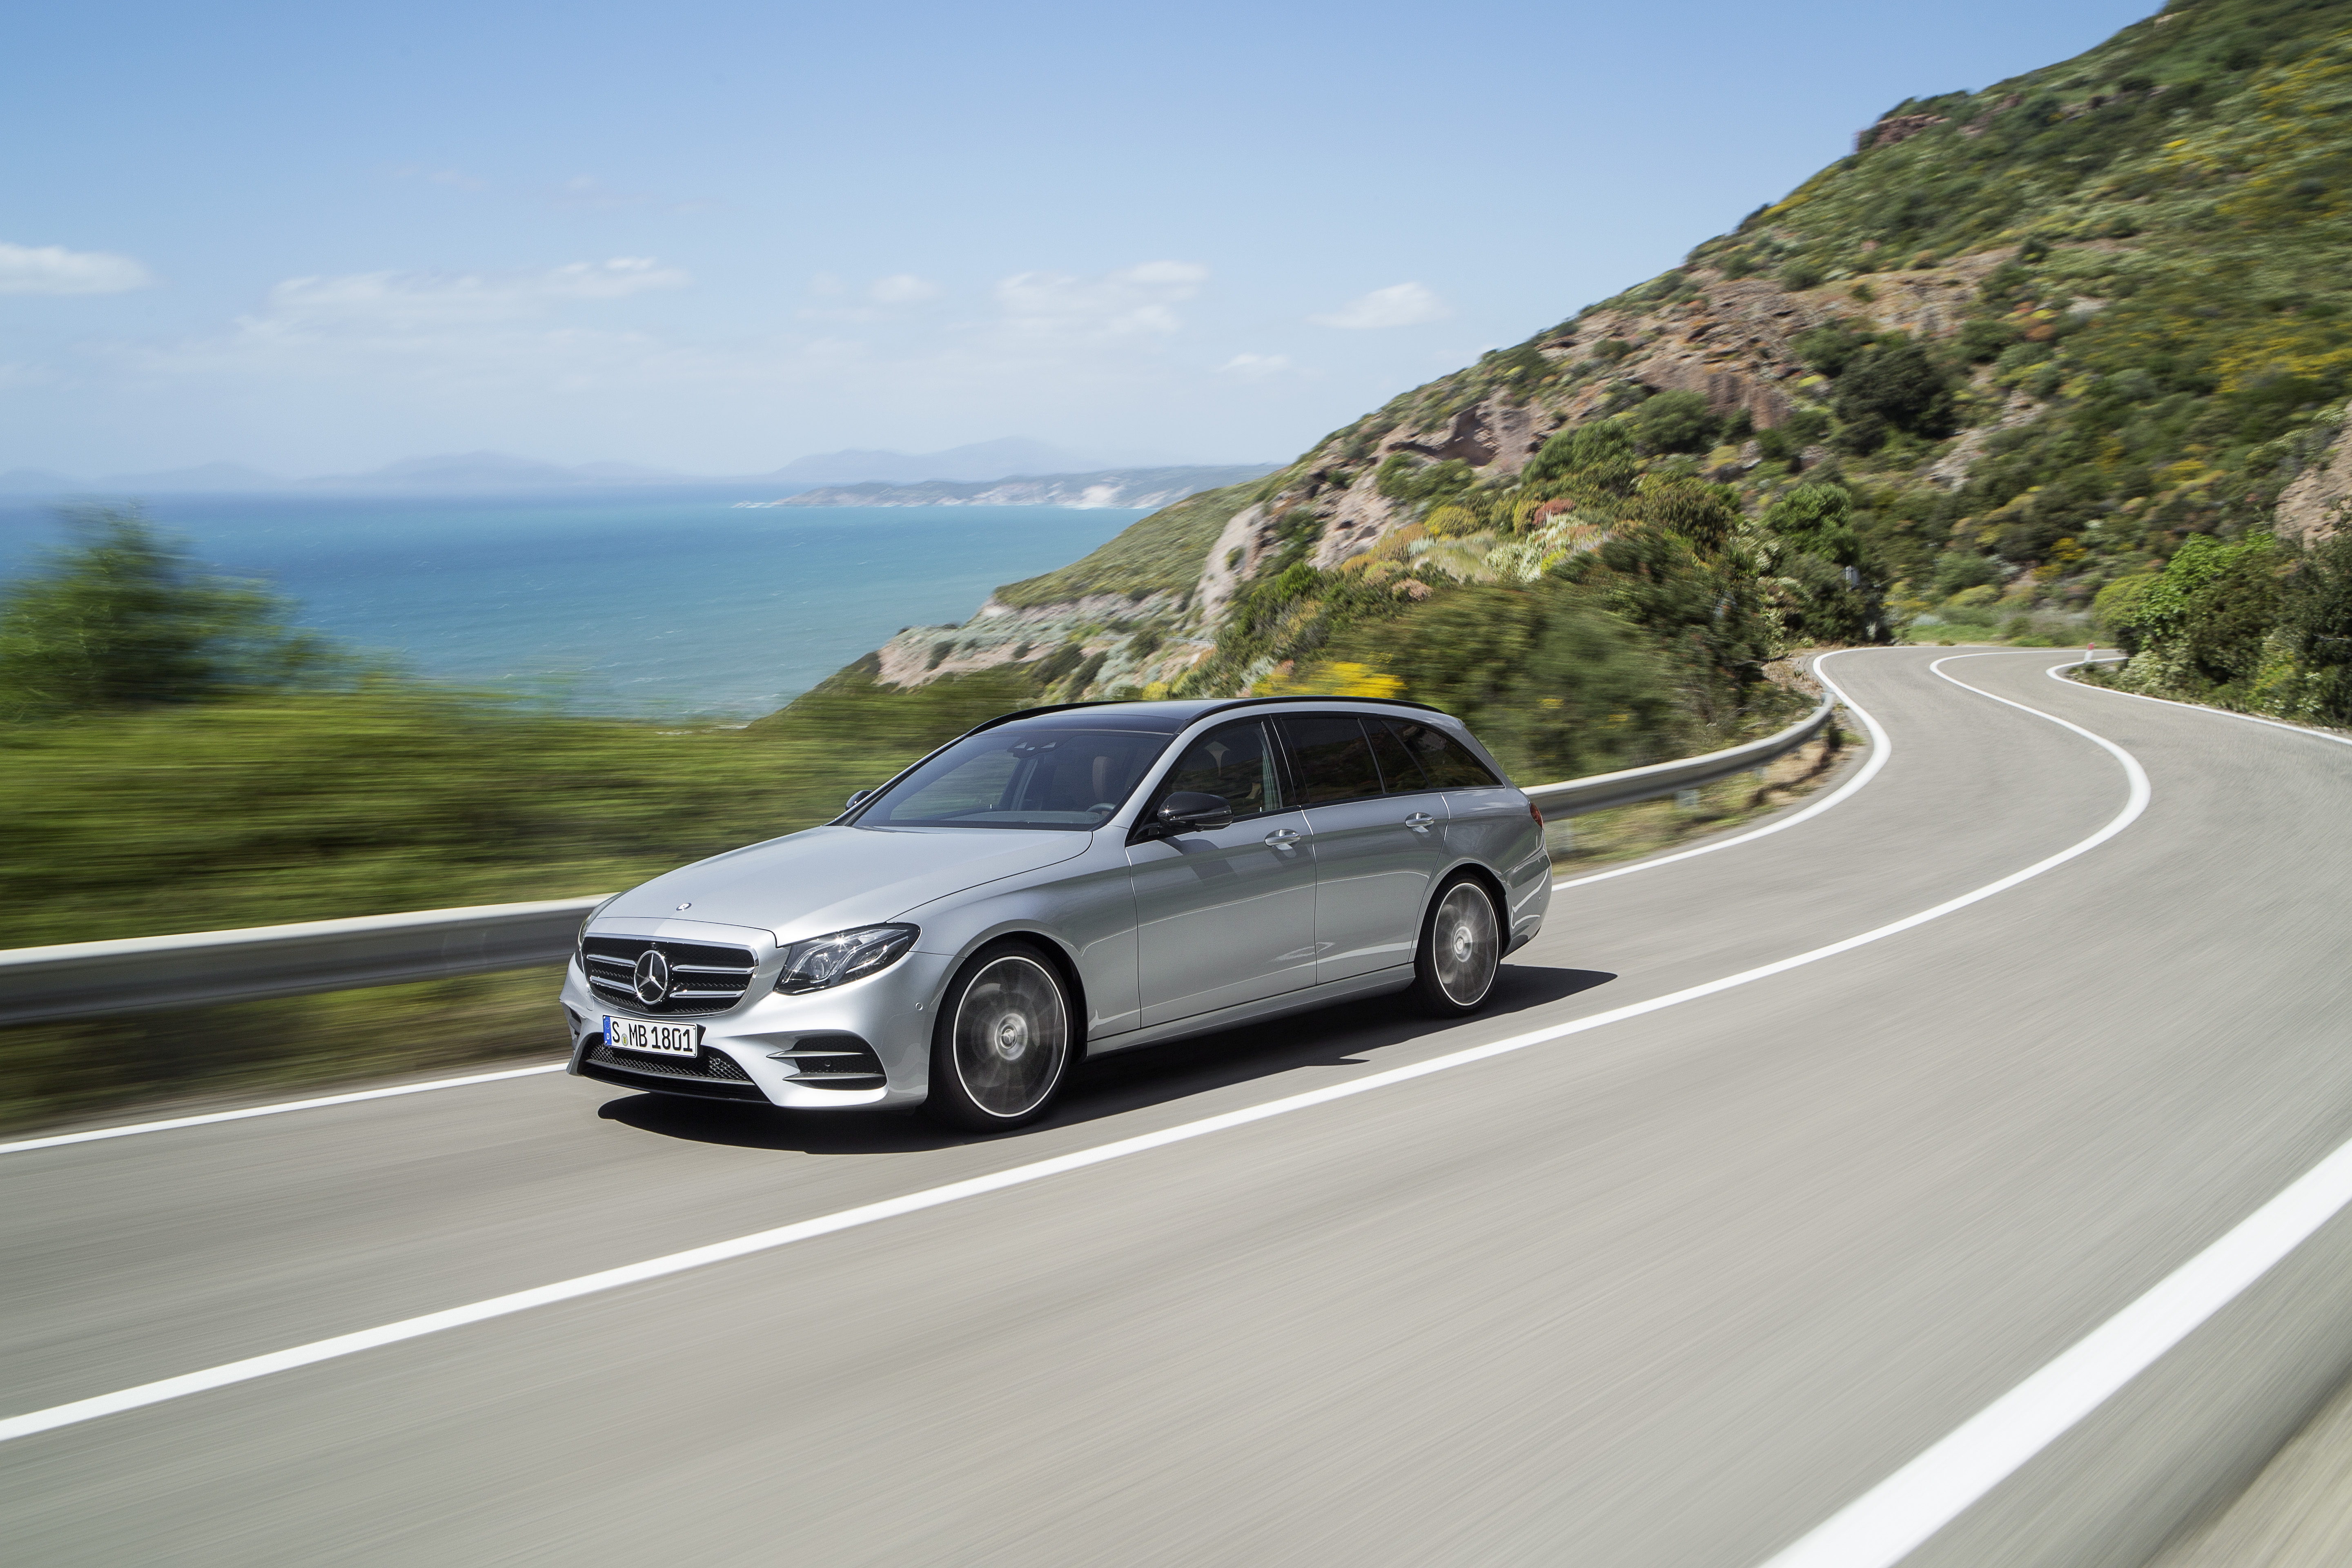 The E-Class Estate features a huge boot